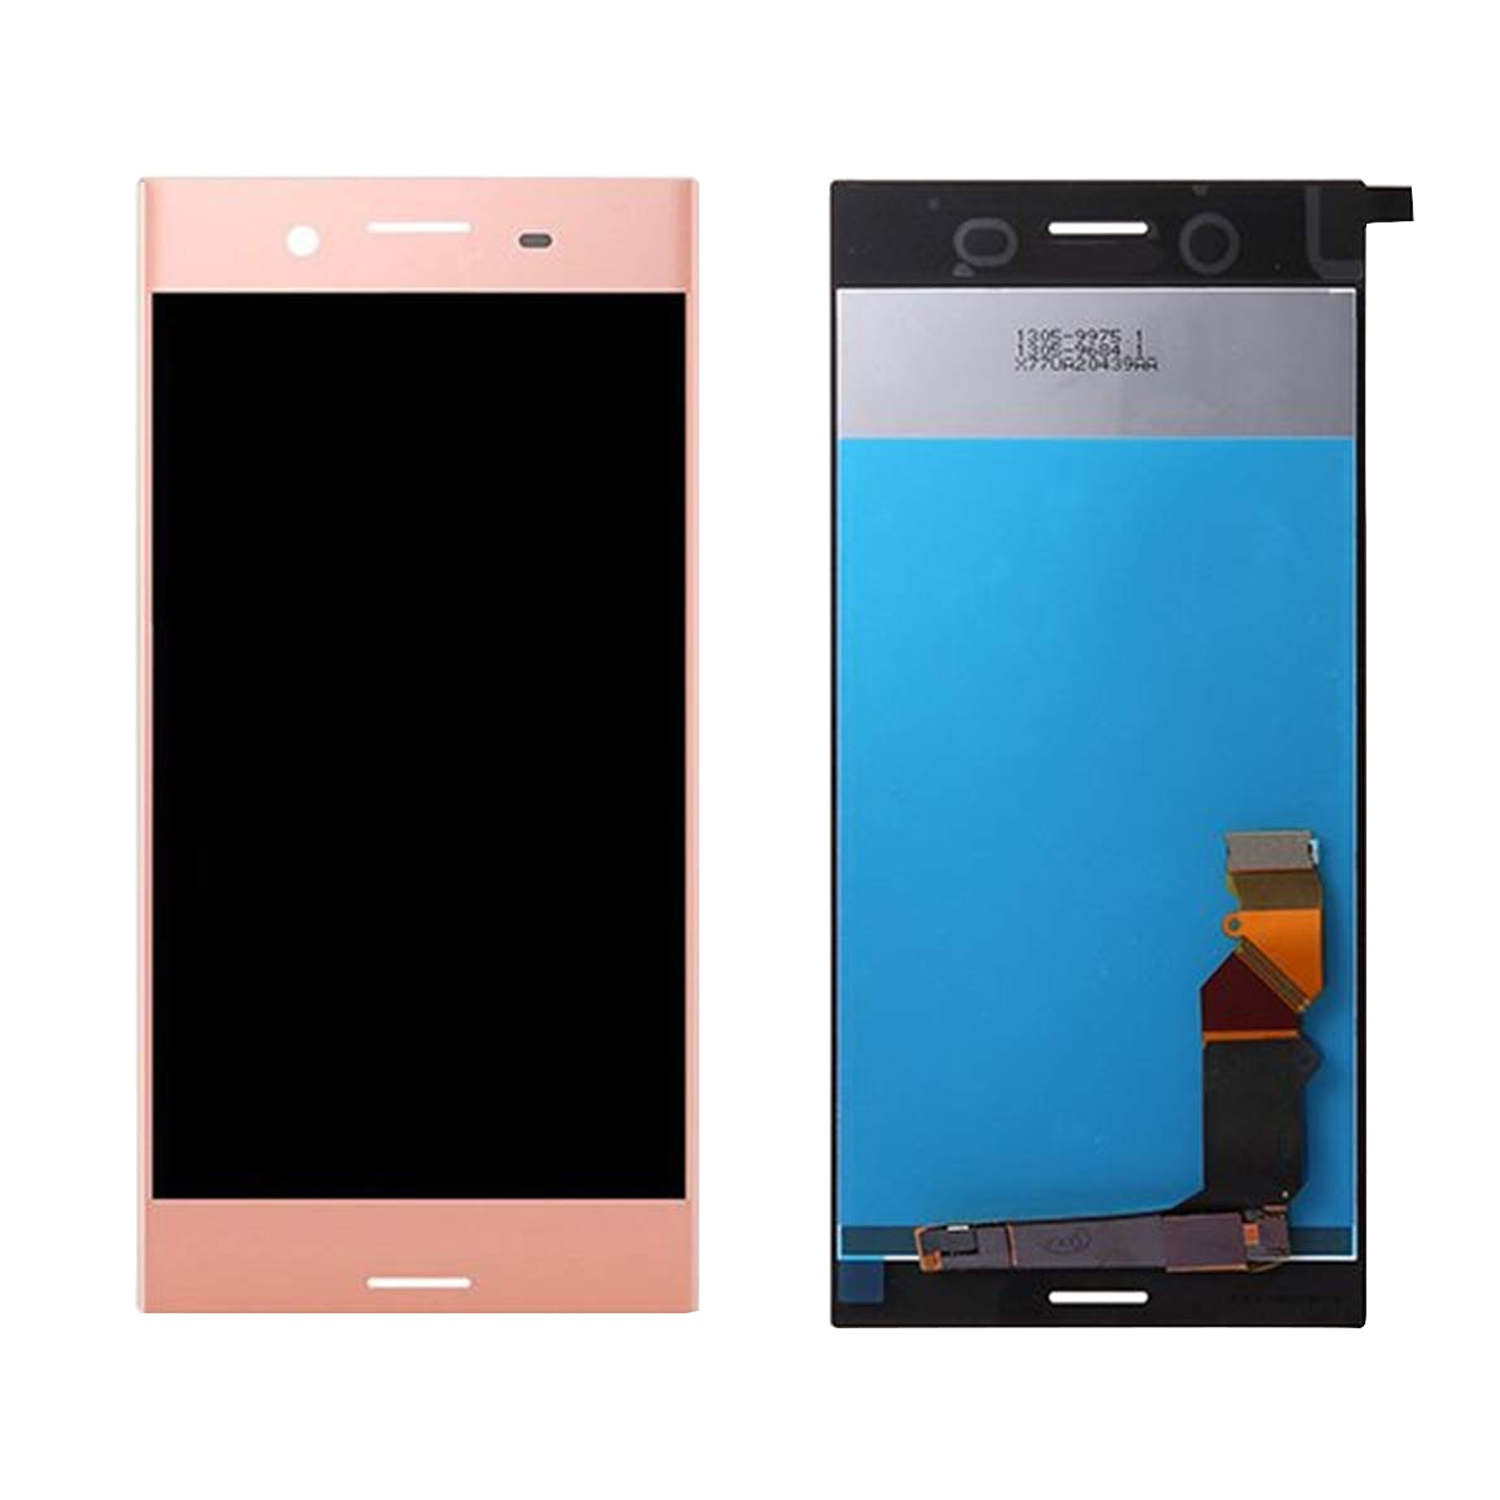 Replacement LCD Display Touch Screen Digitizer Assembly Compatible With Sony Xperia XZ Premium - Pink